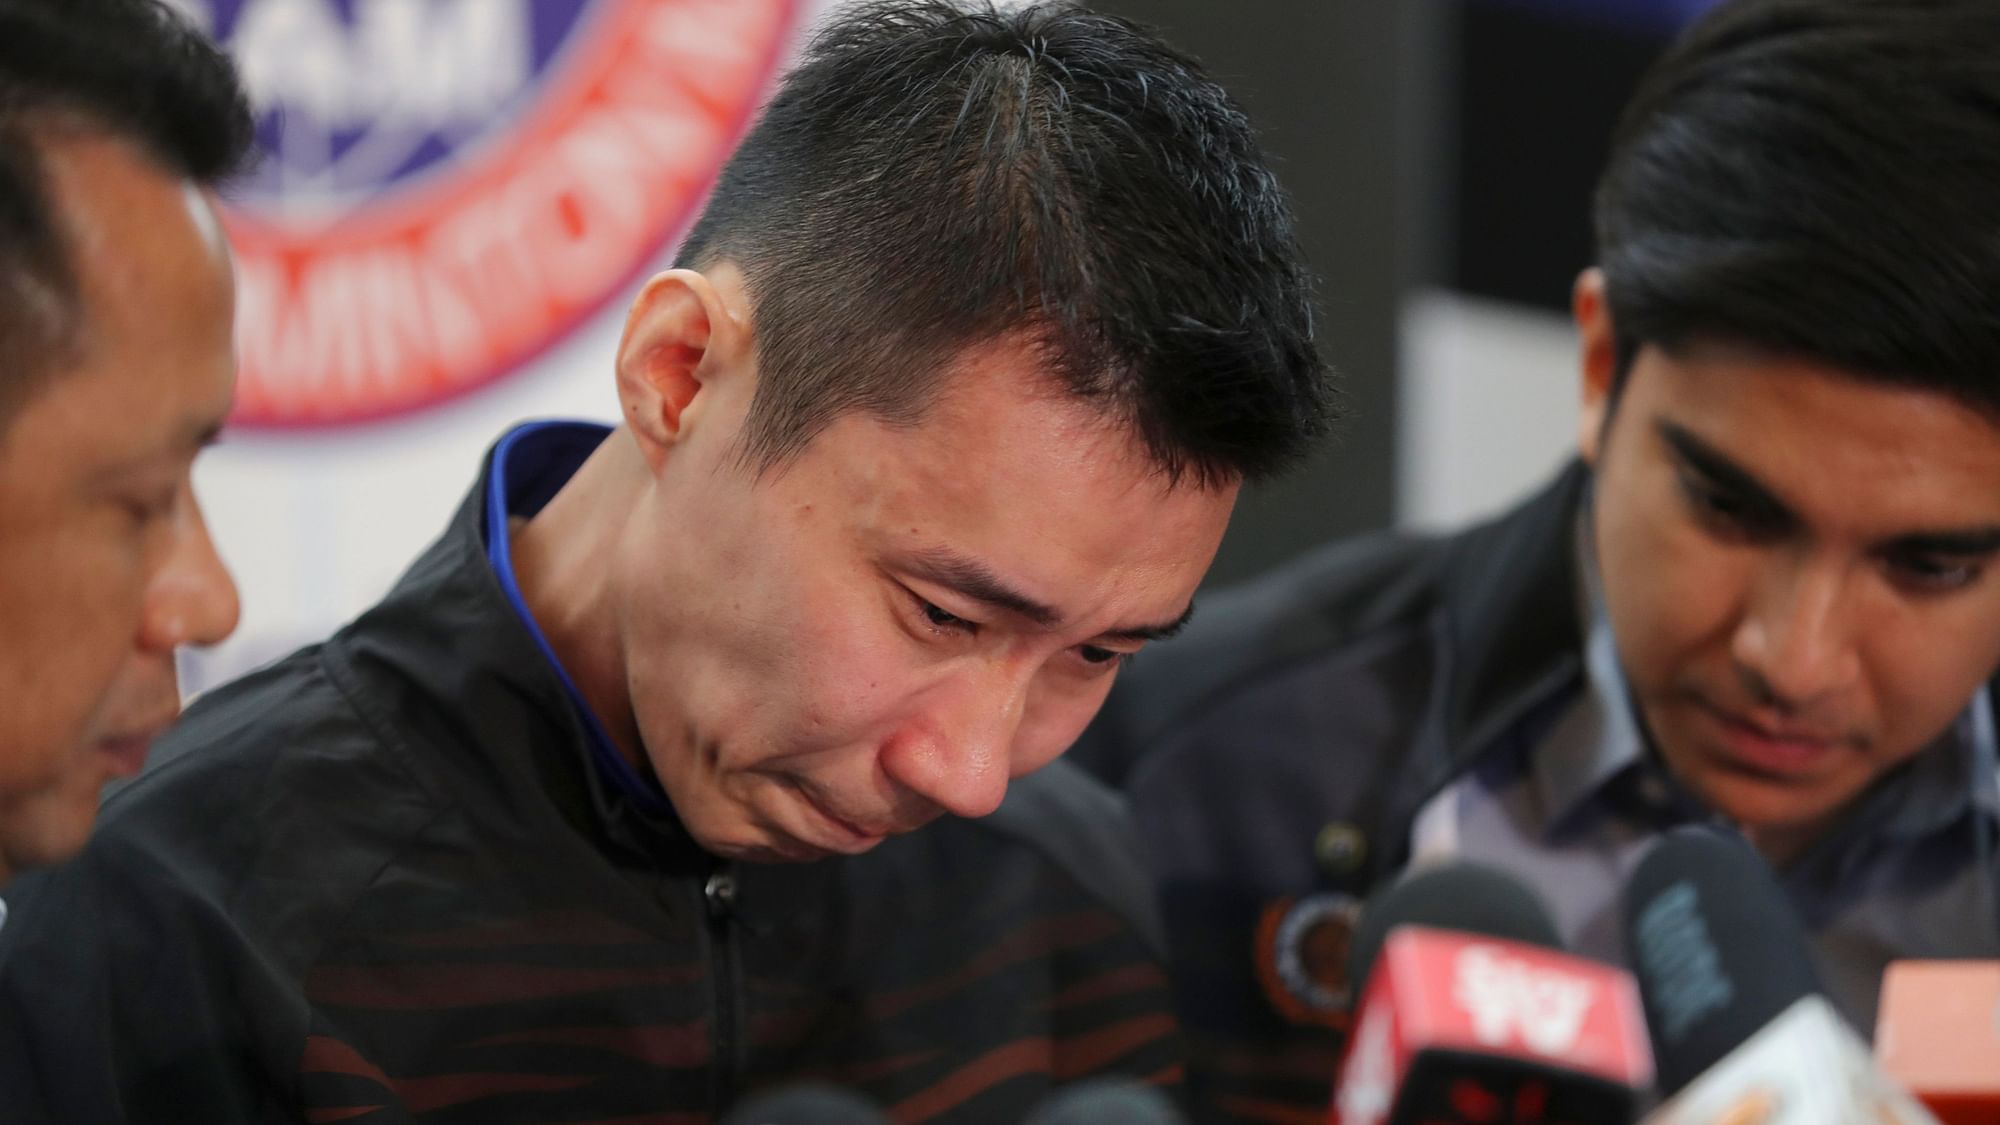 Malaysian badminton player Lee Chong Wei, center, cries during a press conference in Putrajaya, Malaysia, Thursday, 13 June, 2019. 